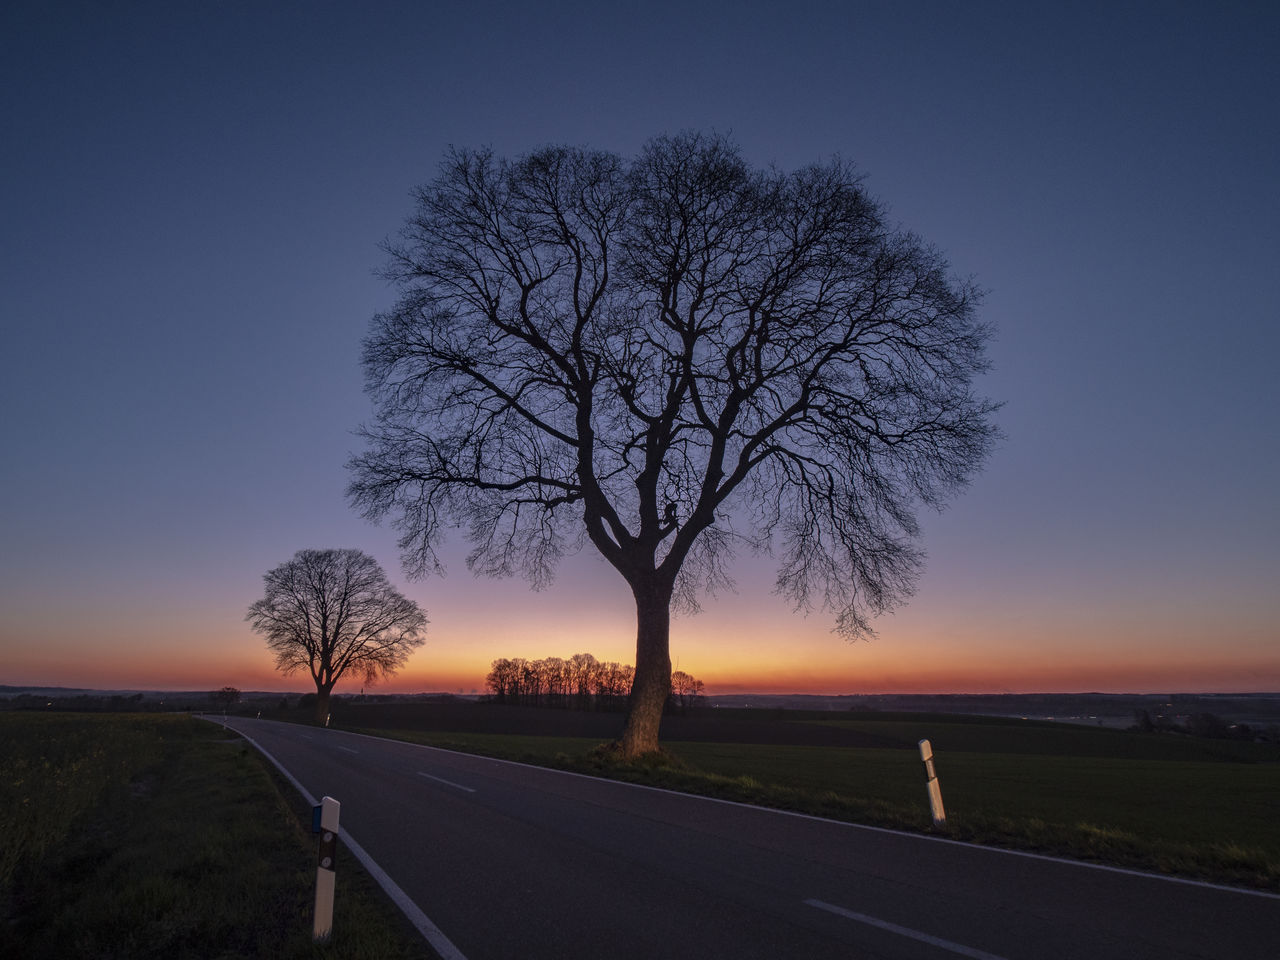 BARE TREE BY ROAD ON FIELD DURING SUNSET